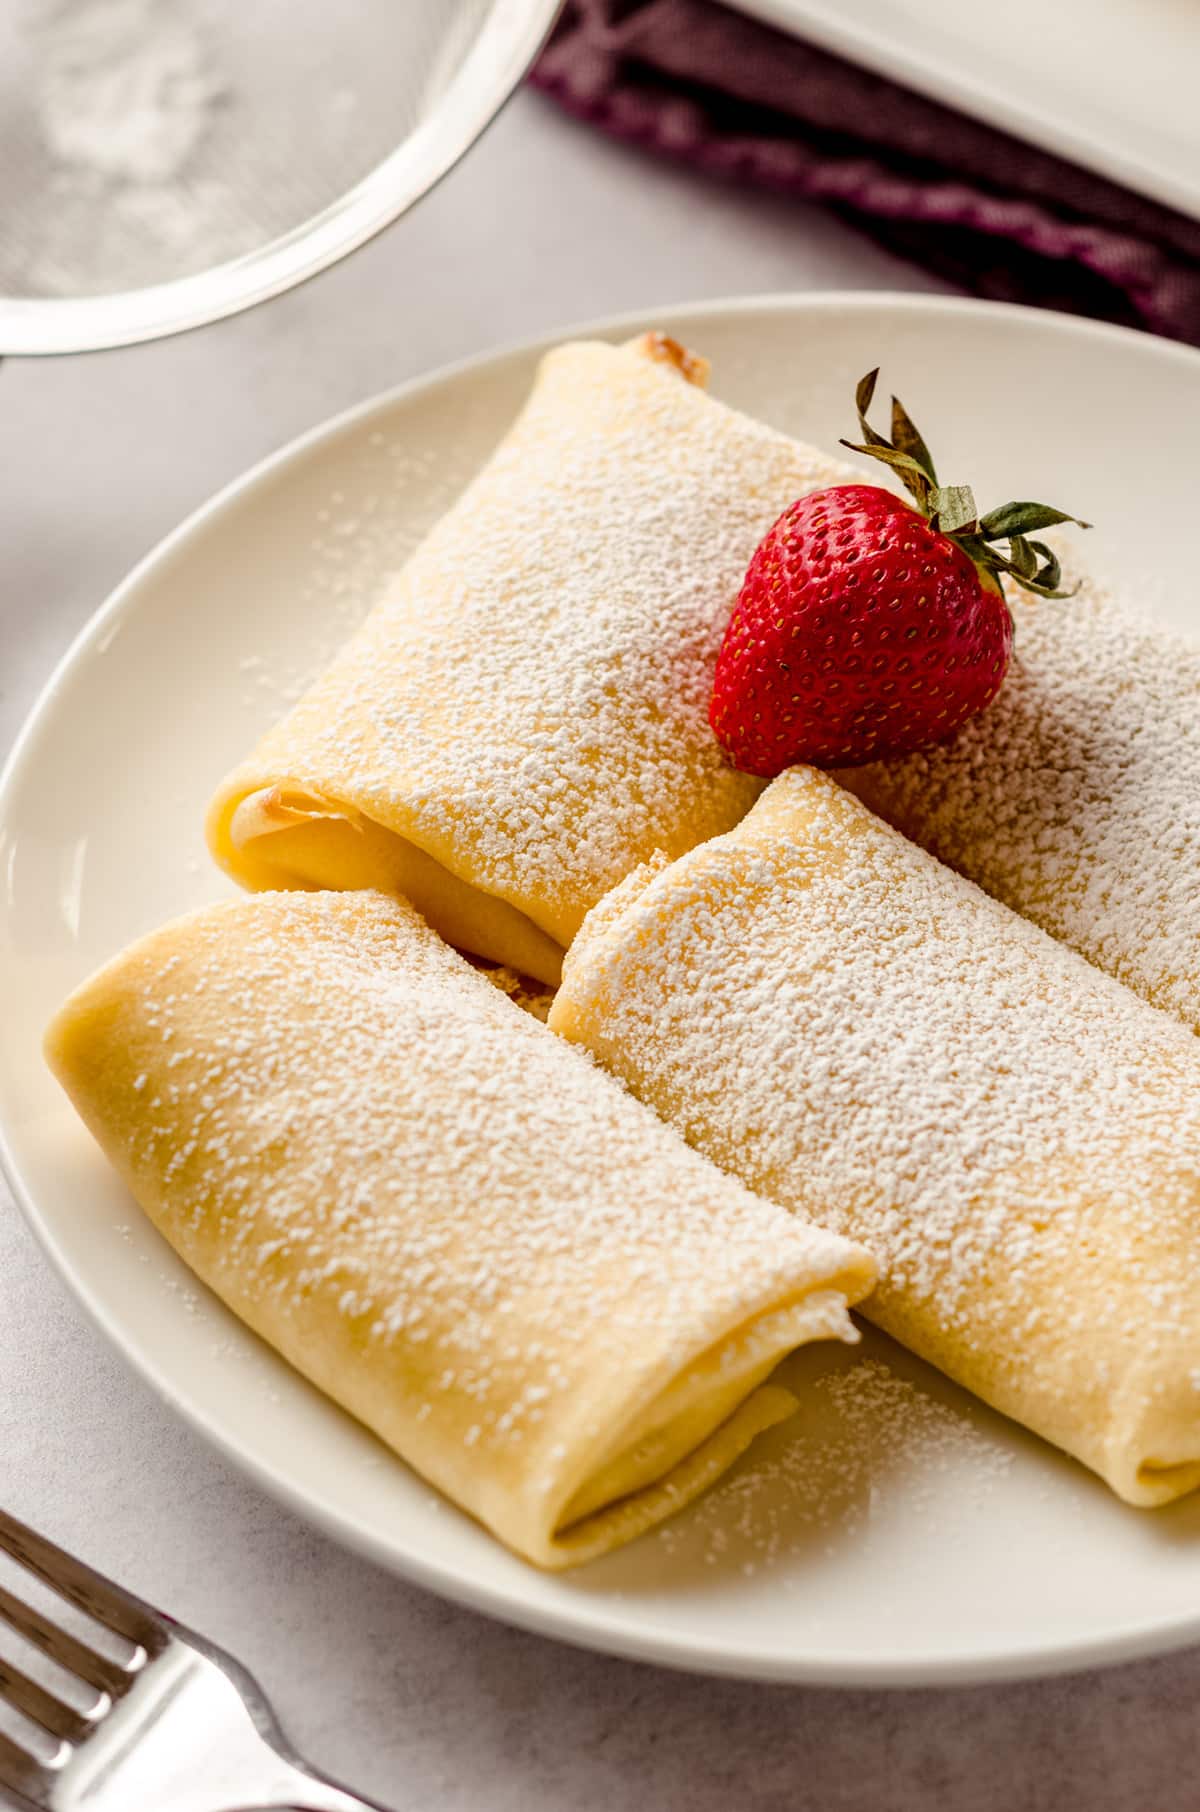 Three cheese blintzes on a plate, garnished with a single strawberry.